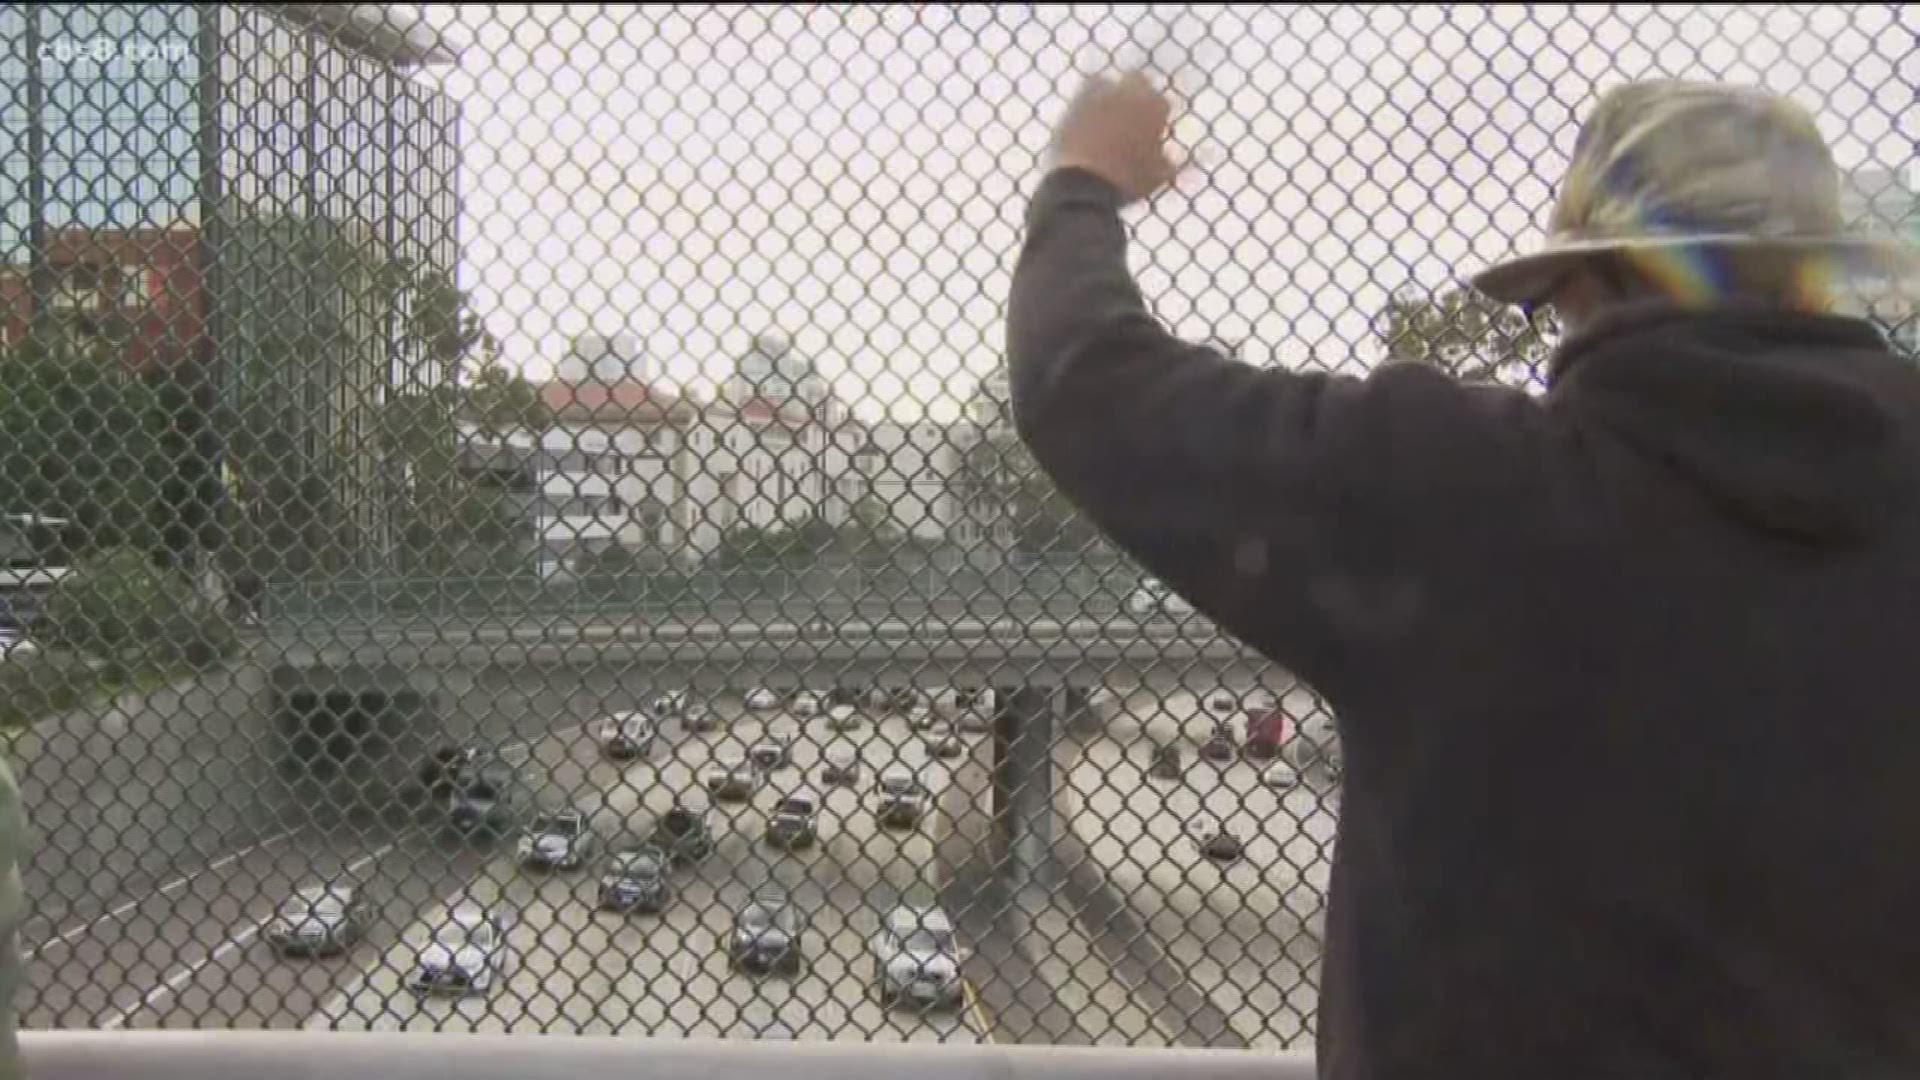 Veterans stood on a bridge overlooking the freeway, urging others to avoid "endless wars."